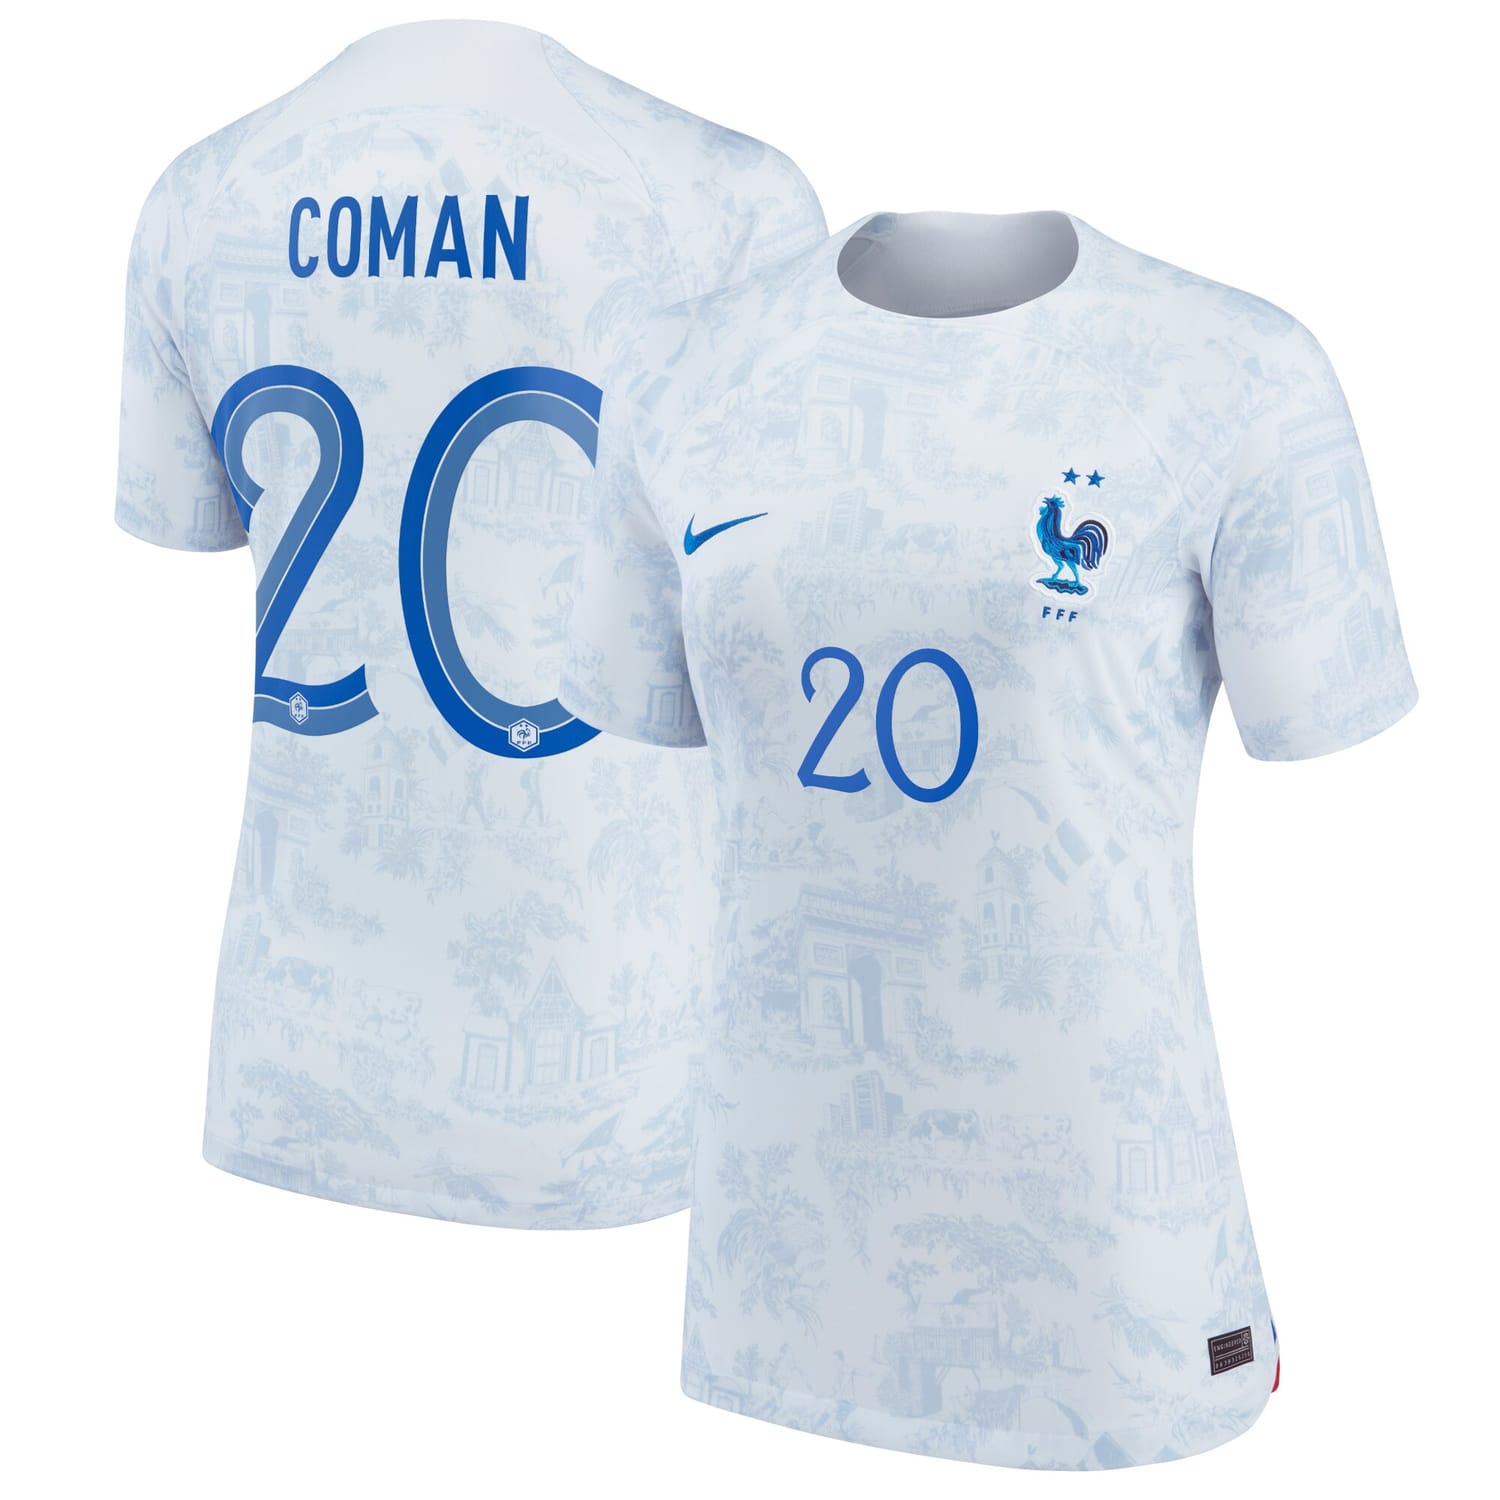 France National Team Away Jersey Shirt 2022 player Kingsley Coman printing for Women